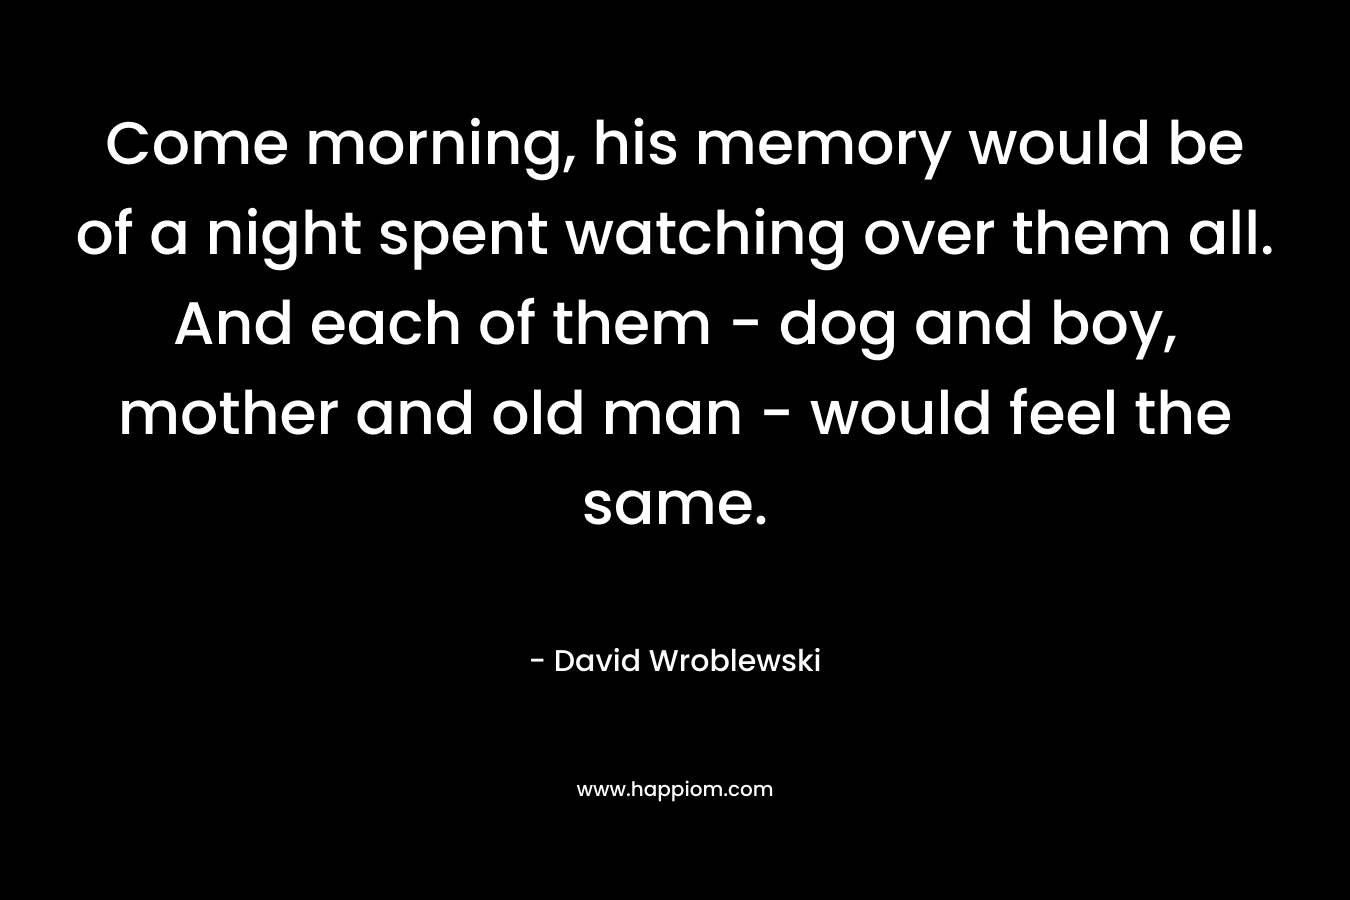 Come morning, his memory would be of a night spent watching over them all. And each of them – dog and boy, mother and old man – would feel the same. – David Wroblewski